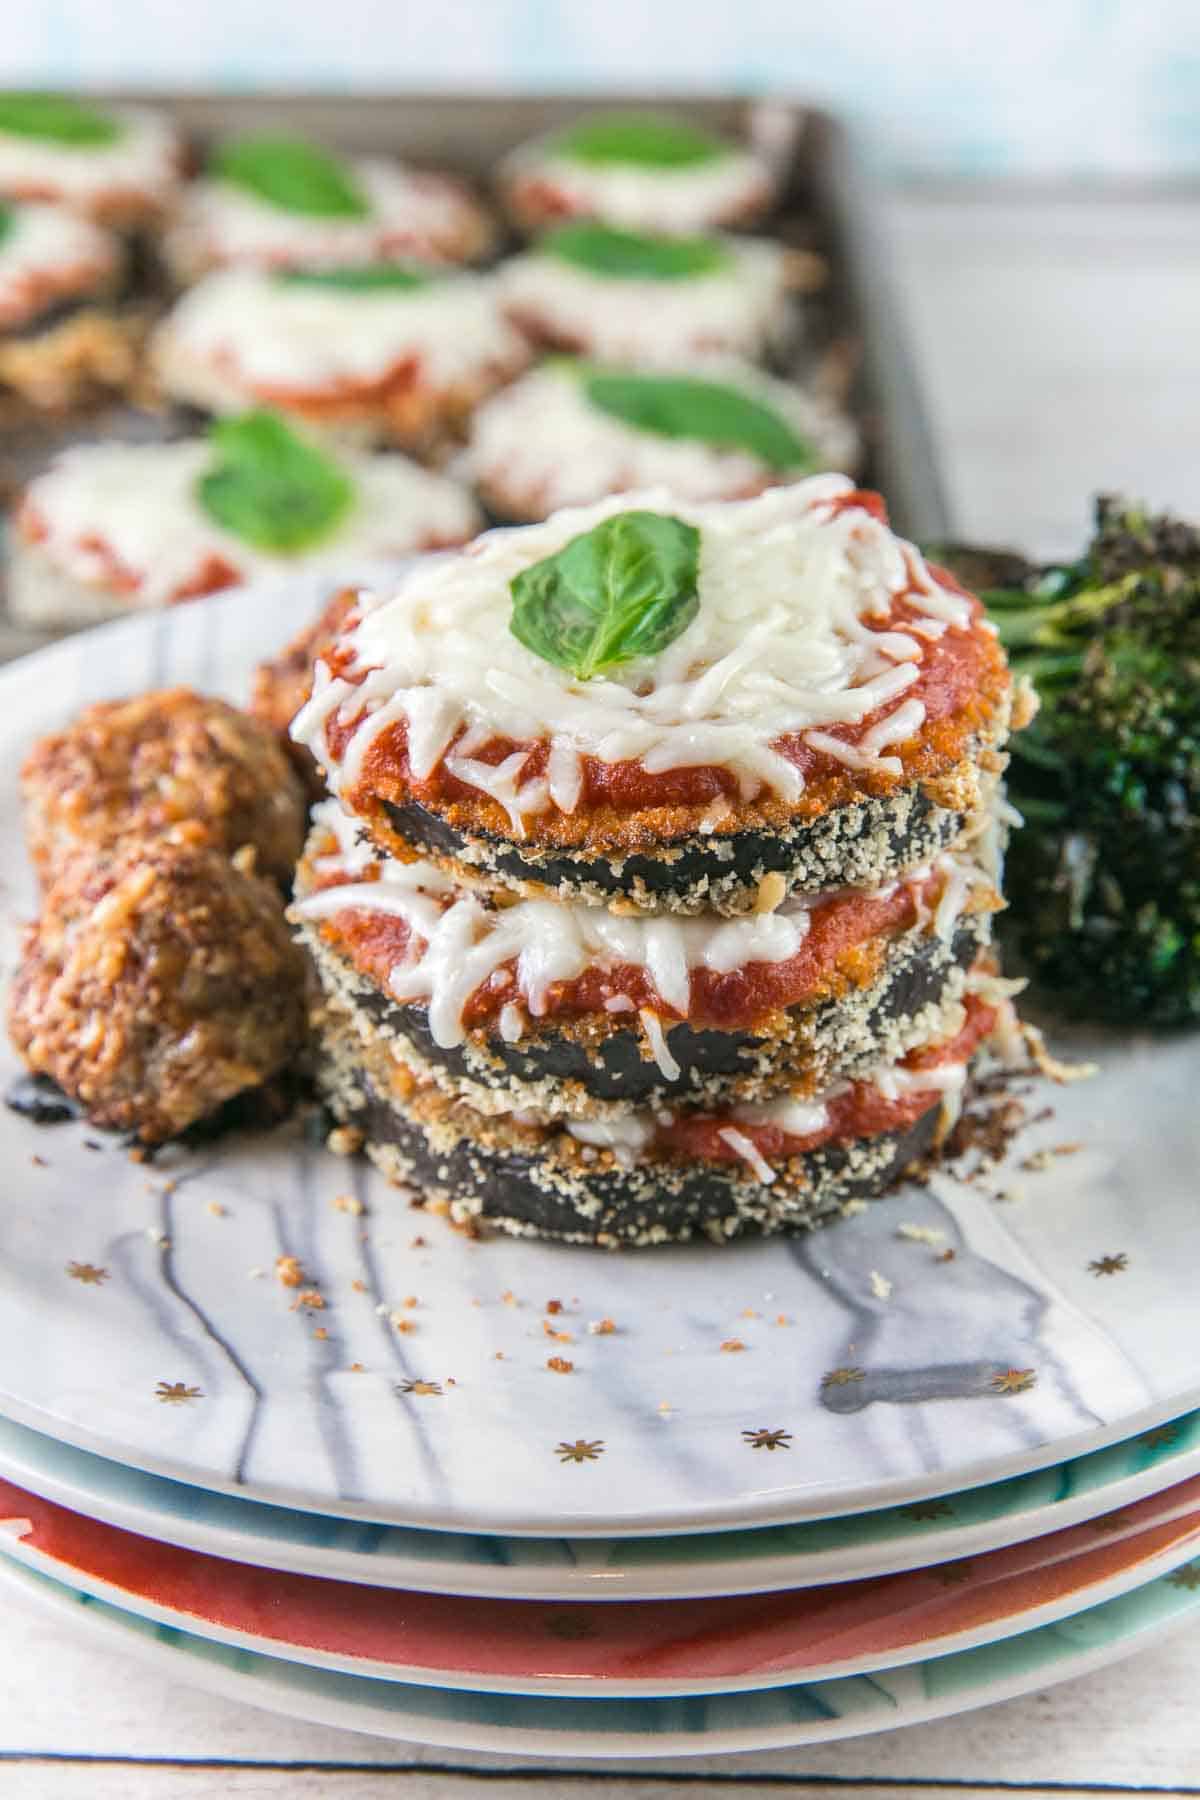 Sheet Pan Eggplant Parmesan: make a classic Italian dish healthier and quick with this weeknight-friendly baked sheet pan dinner and a side of turkey meatballs. Skip frying and bake instead! {Bunsen Burner Bakery} #eggplantparm #sheetpan #dinner